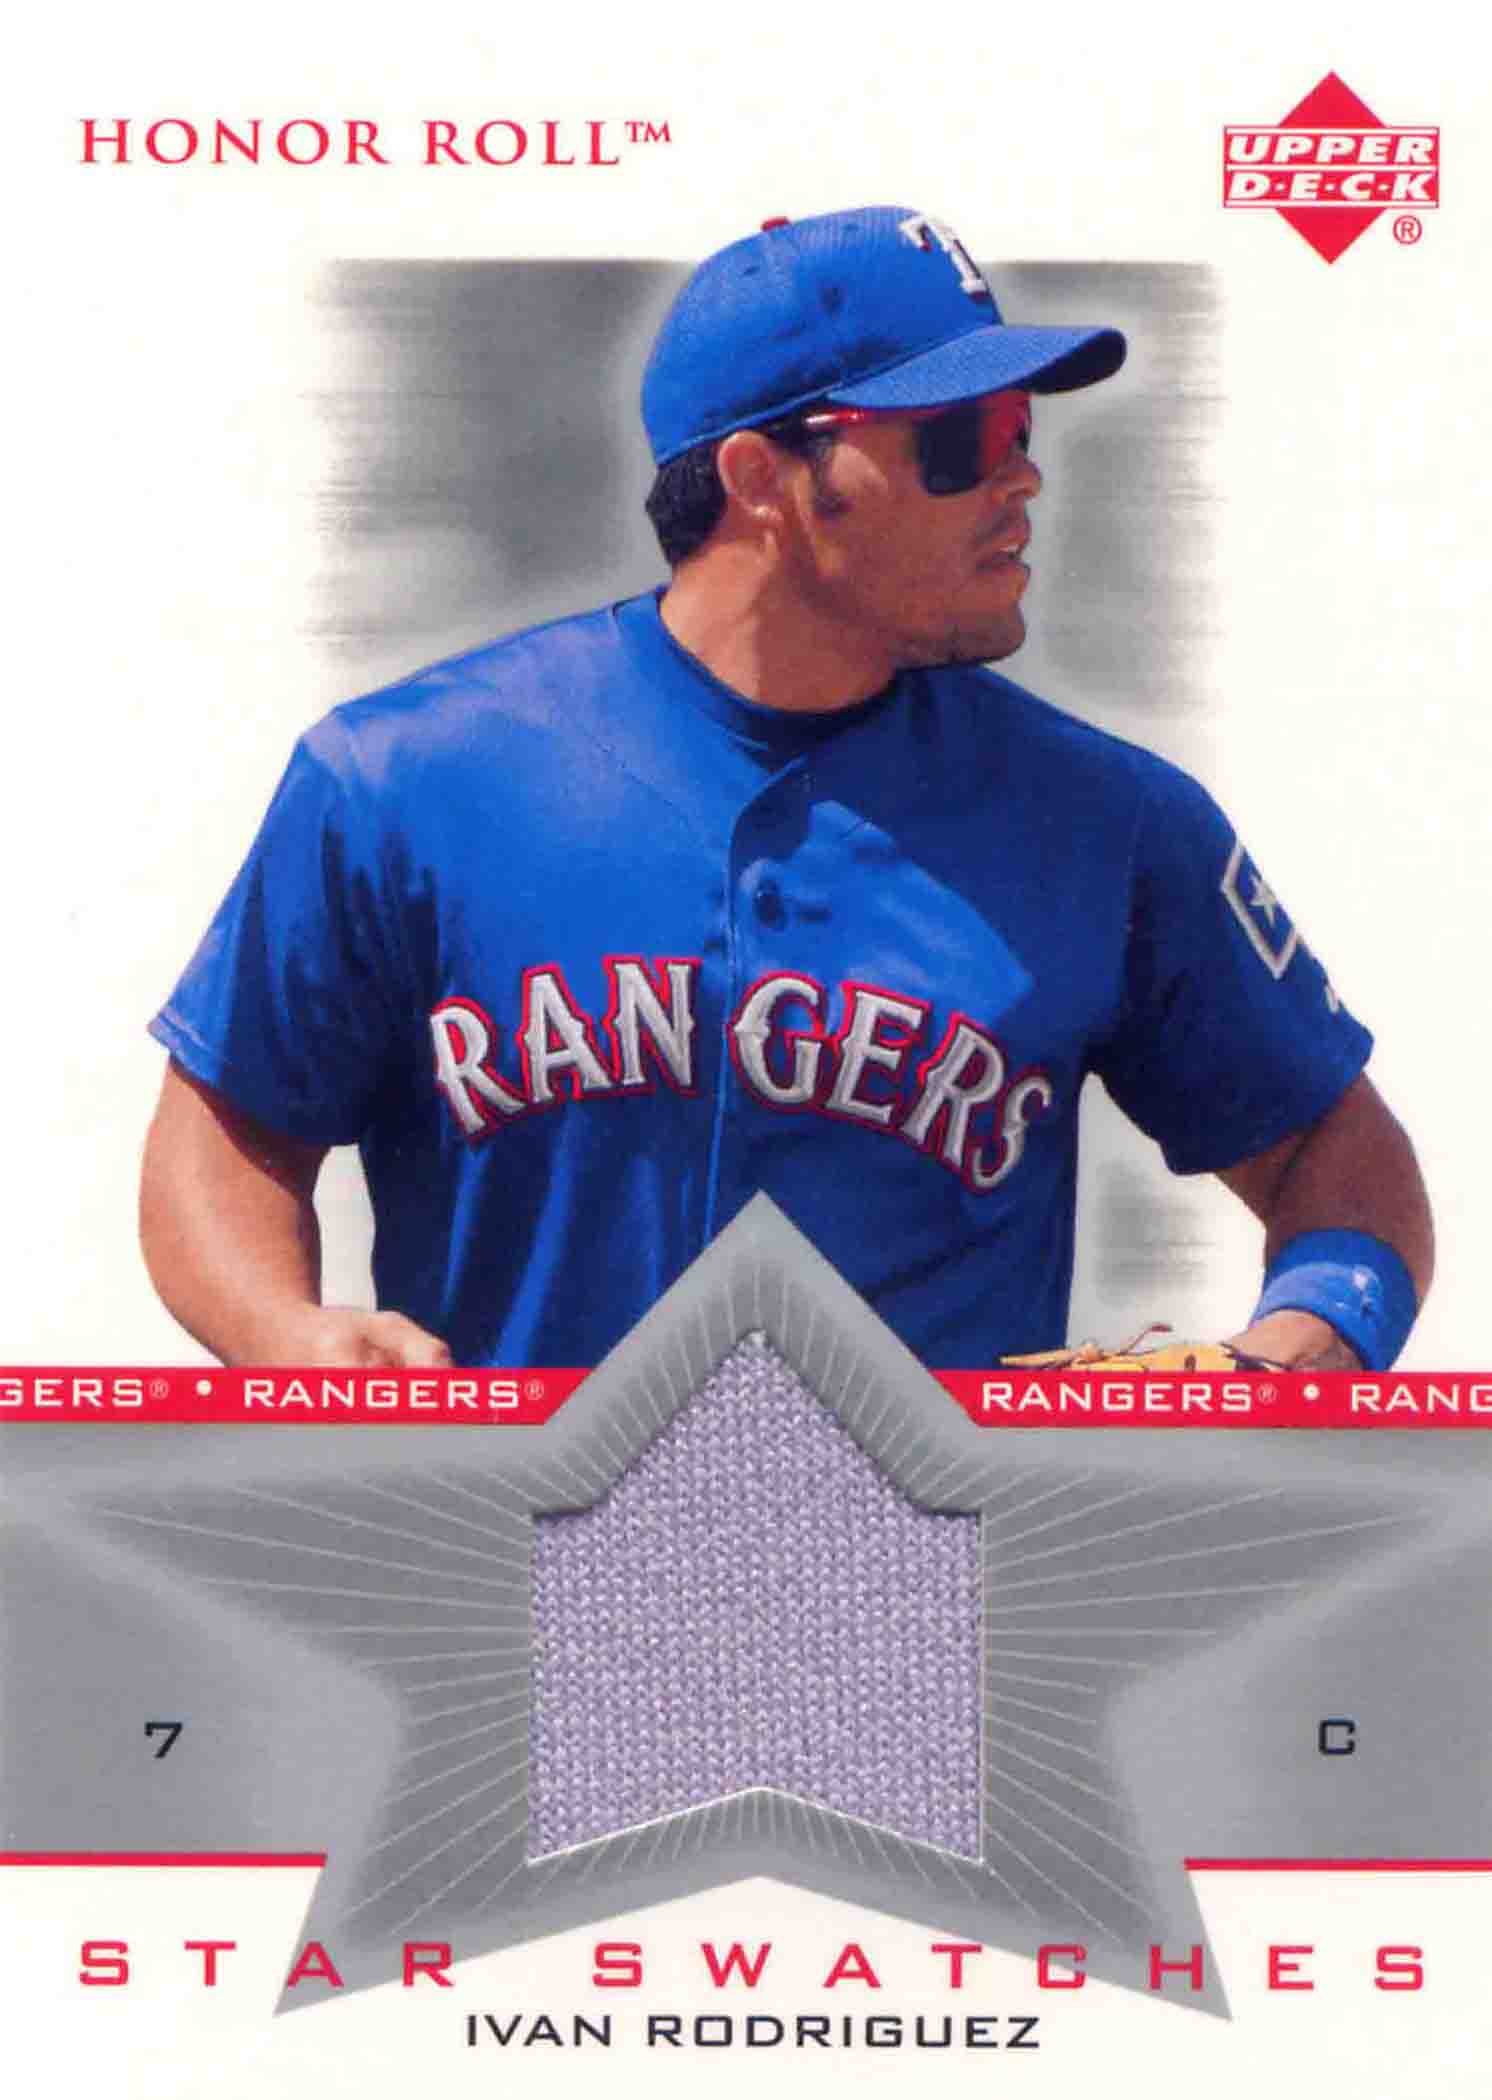 2002 Upper Deck Honor Roll Star Swatches Game Jersey